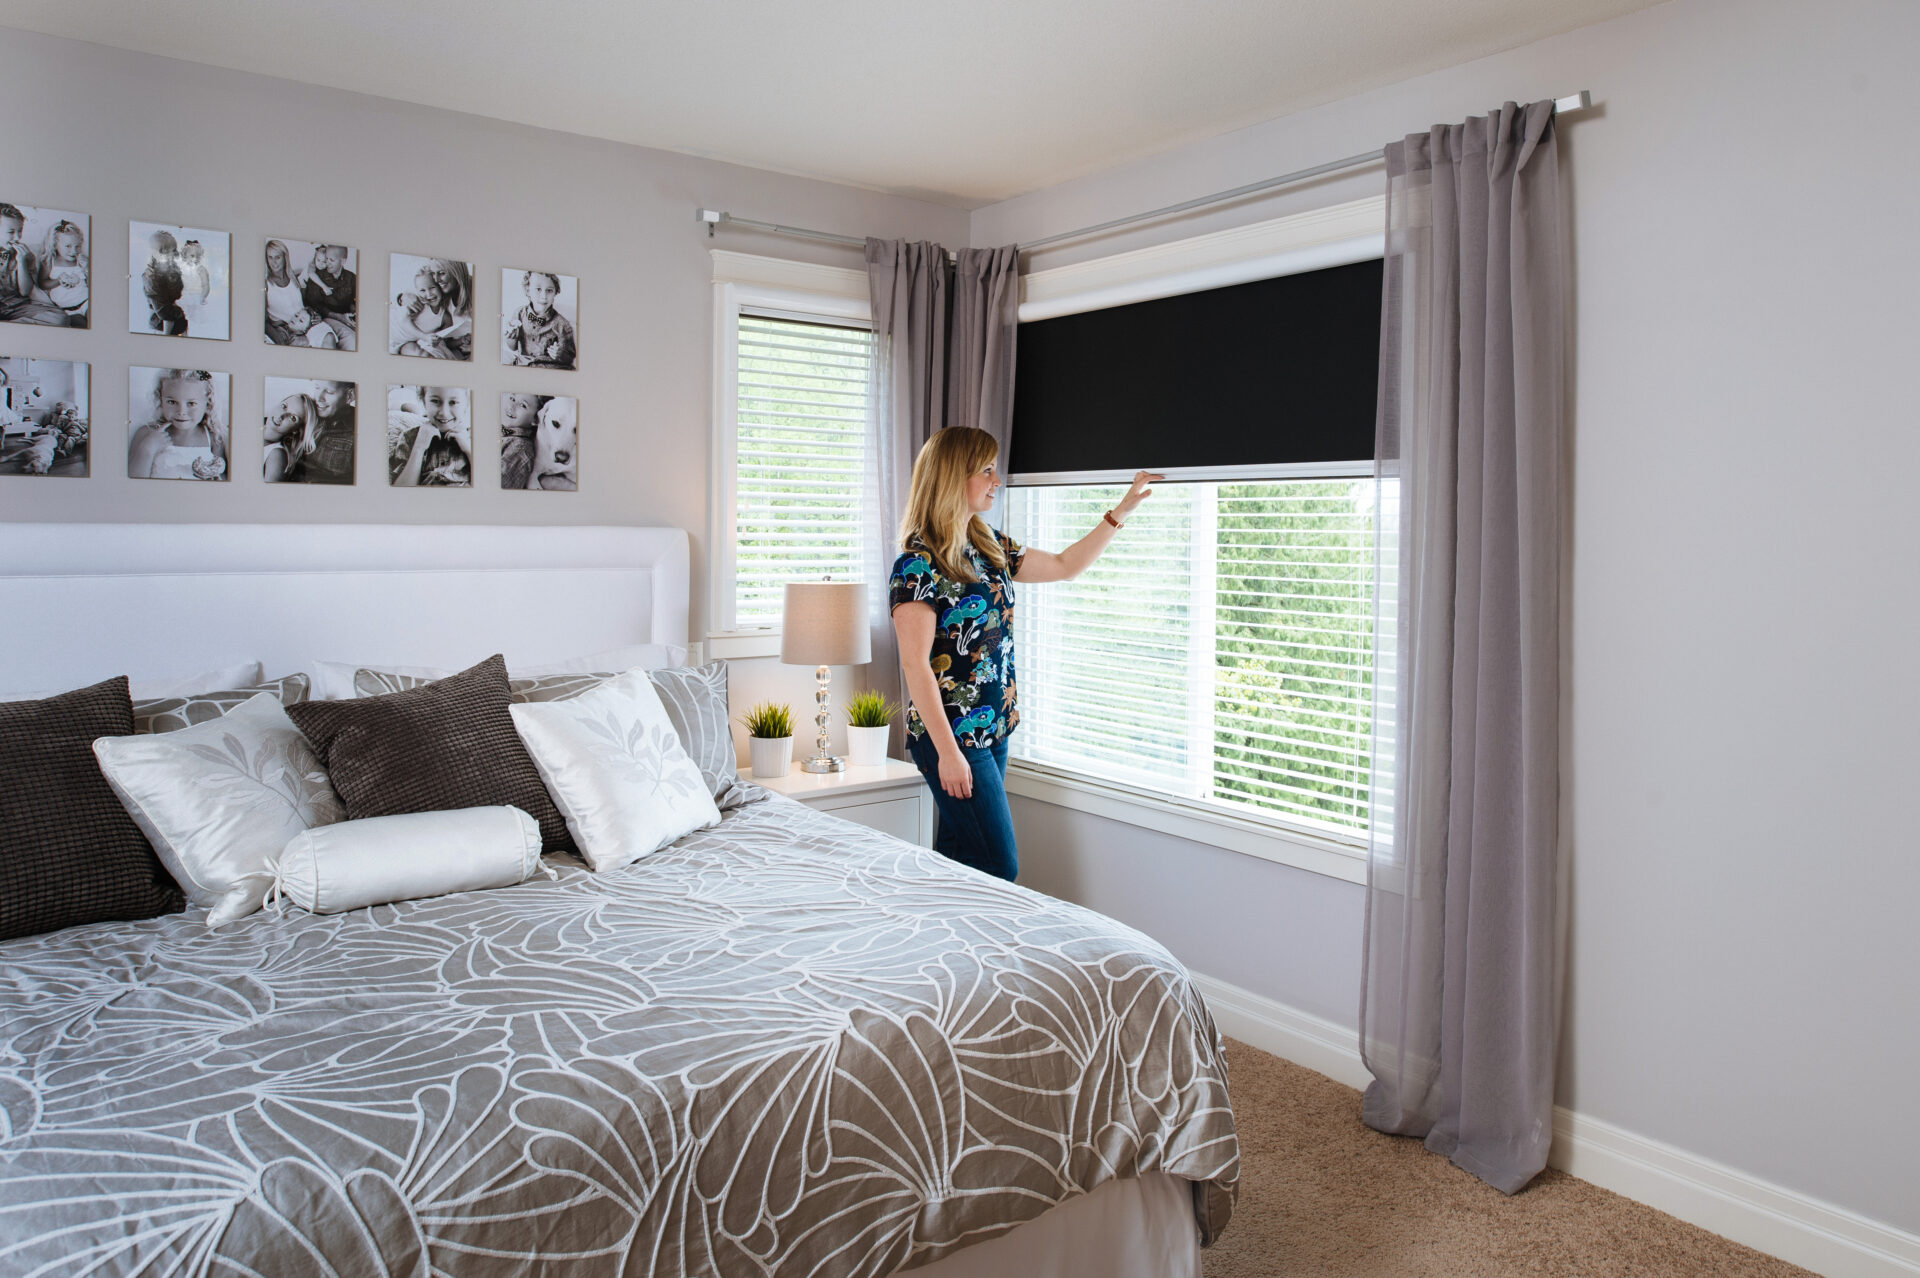 Phantom's Retractable Window Screens never interfere with your view out and retract away when they're not needed. The screen rolls up and hides away on your window's framing.